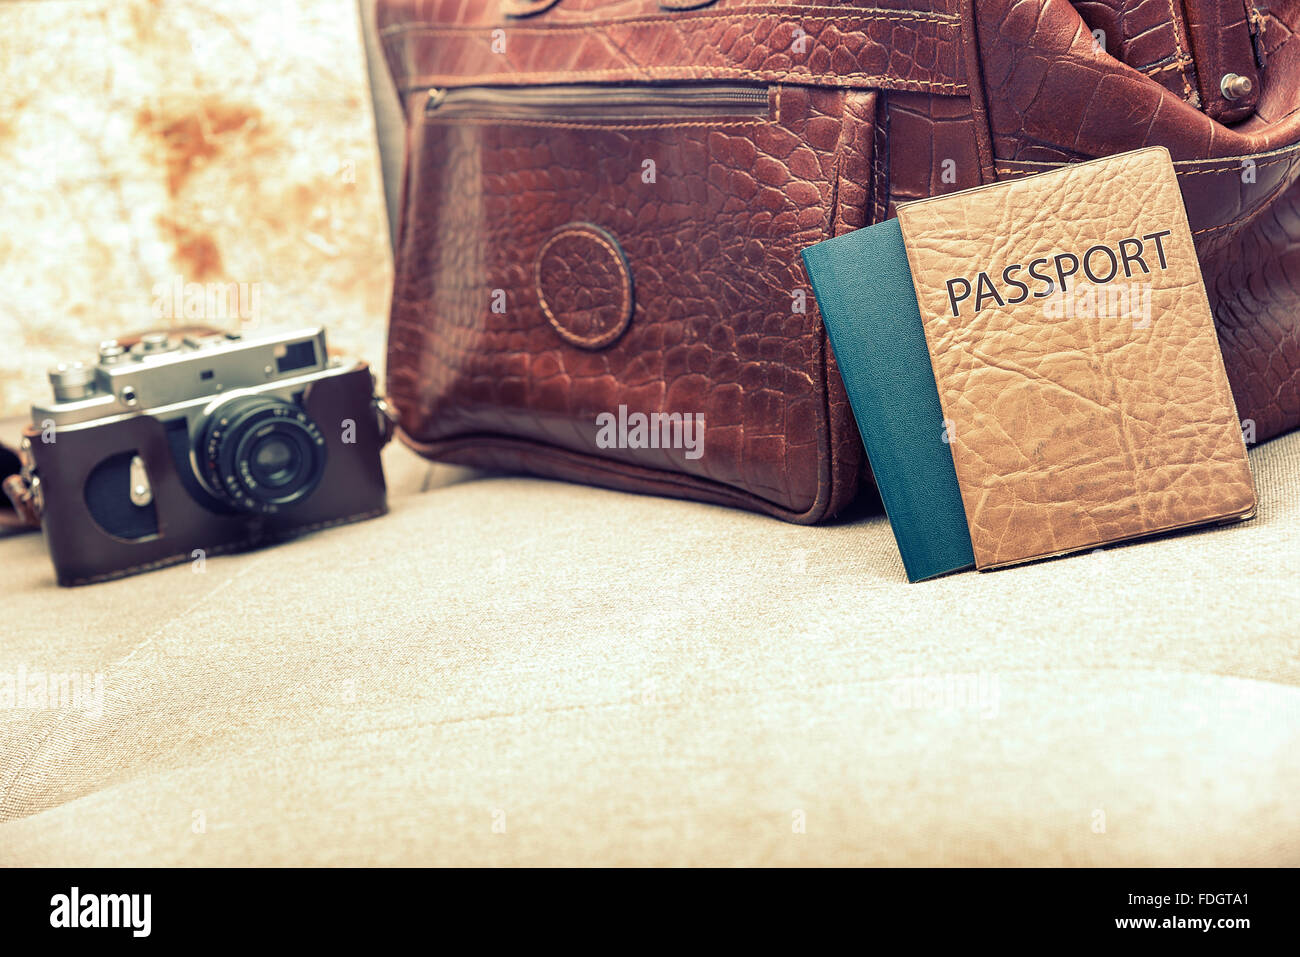 Bag and passport on the couch. Stock Photo